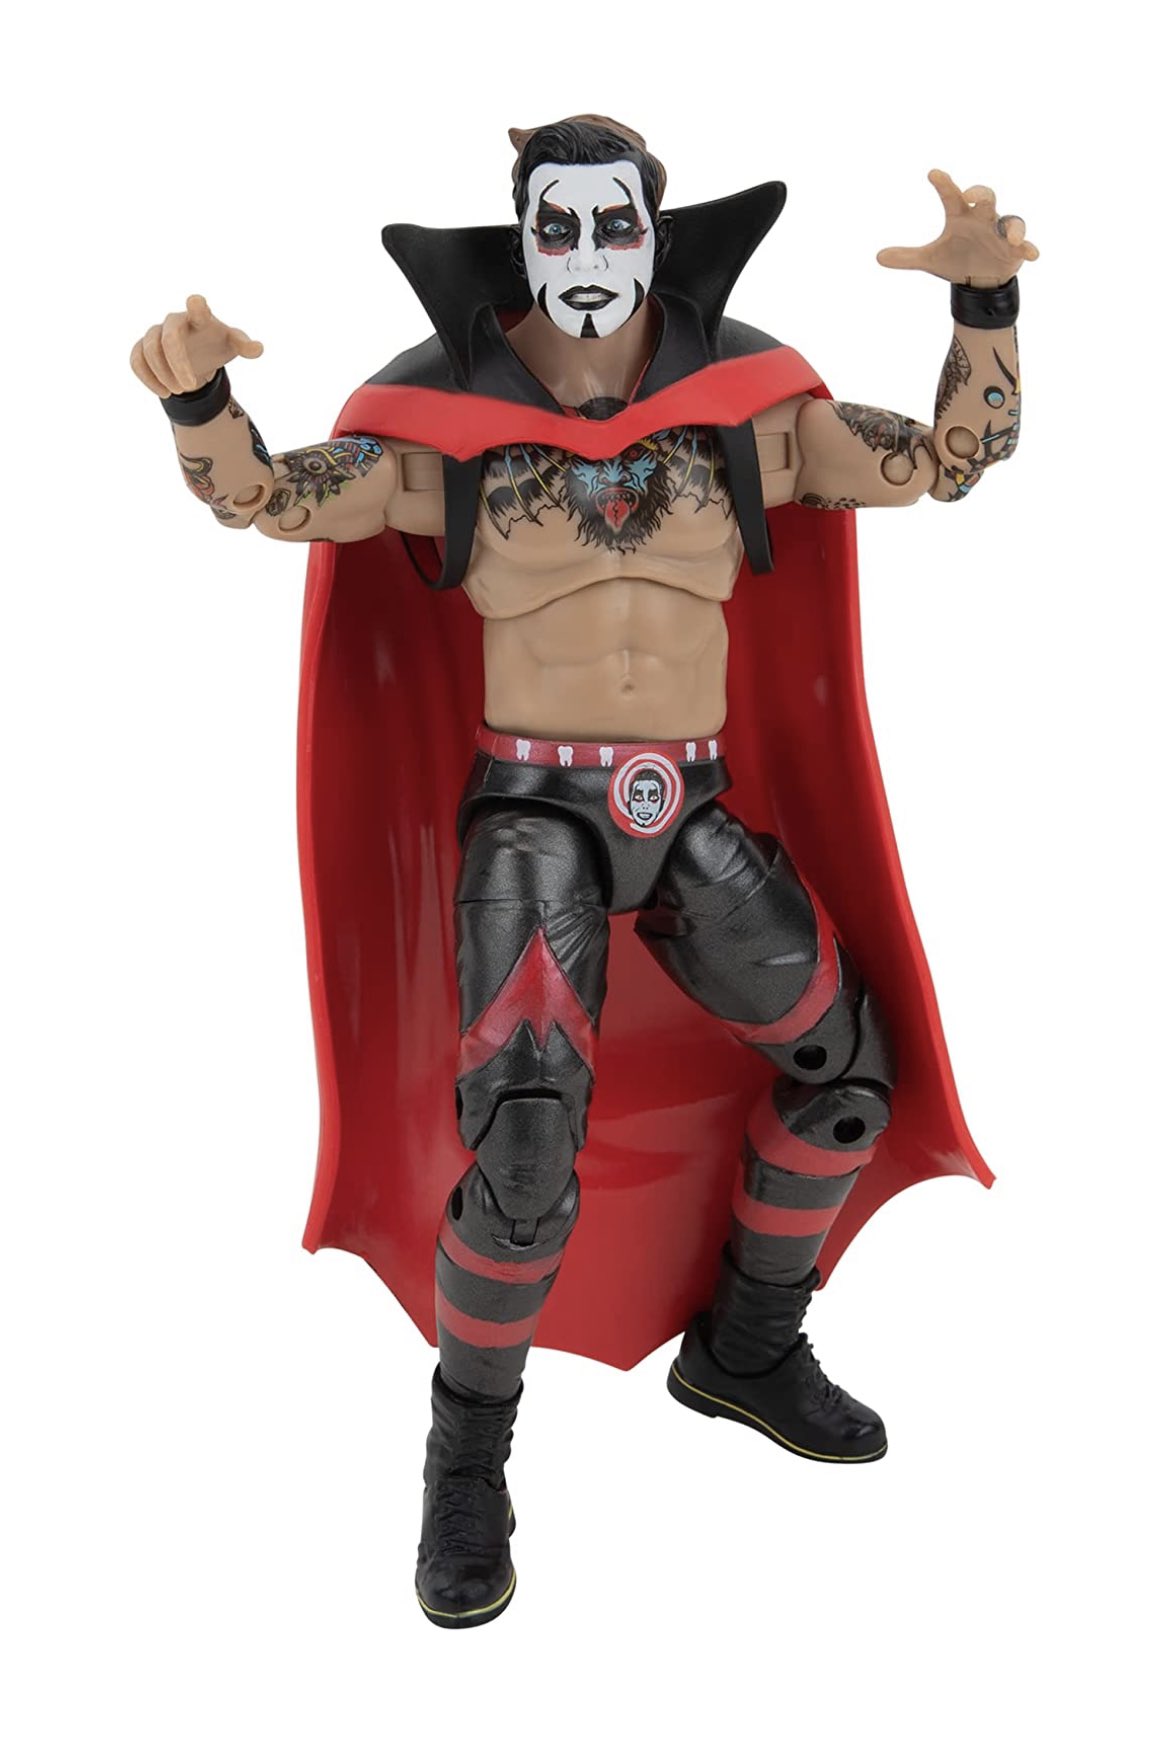 preternia on X: Jazwares AEW Unrivaled Hookhausen 2-pack: Hook and  Danhausen is up for preorder on  ($44.99) -   #ad  / X